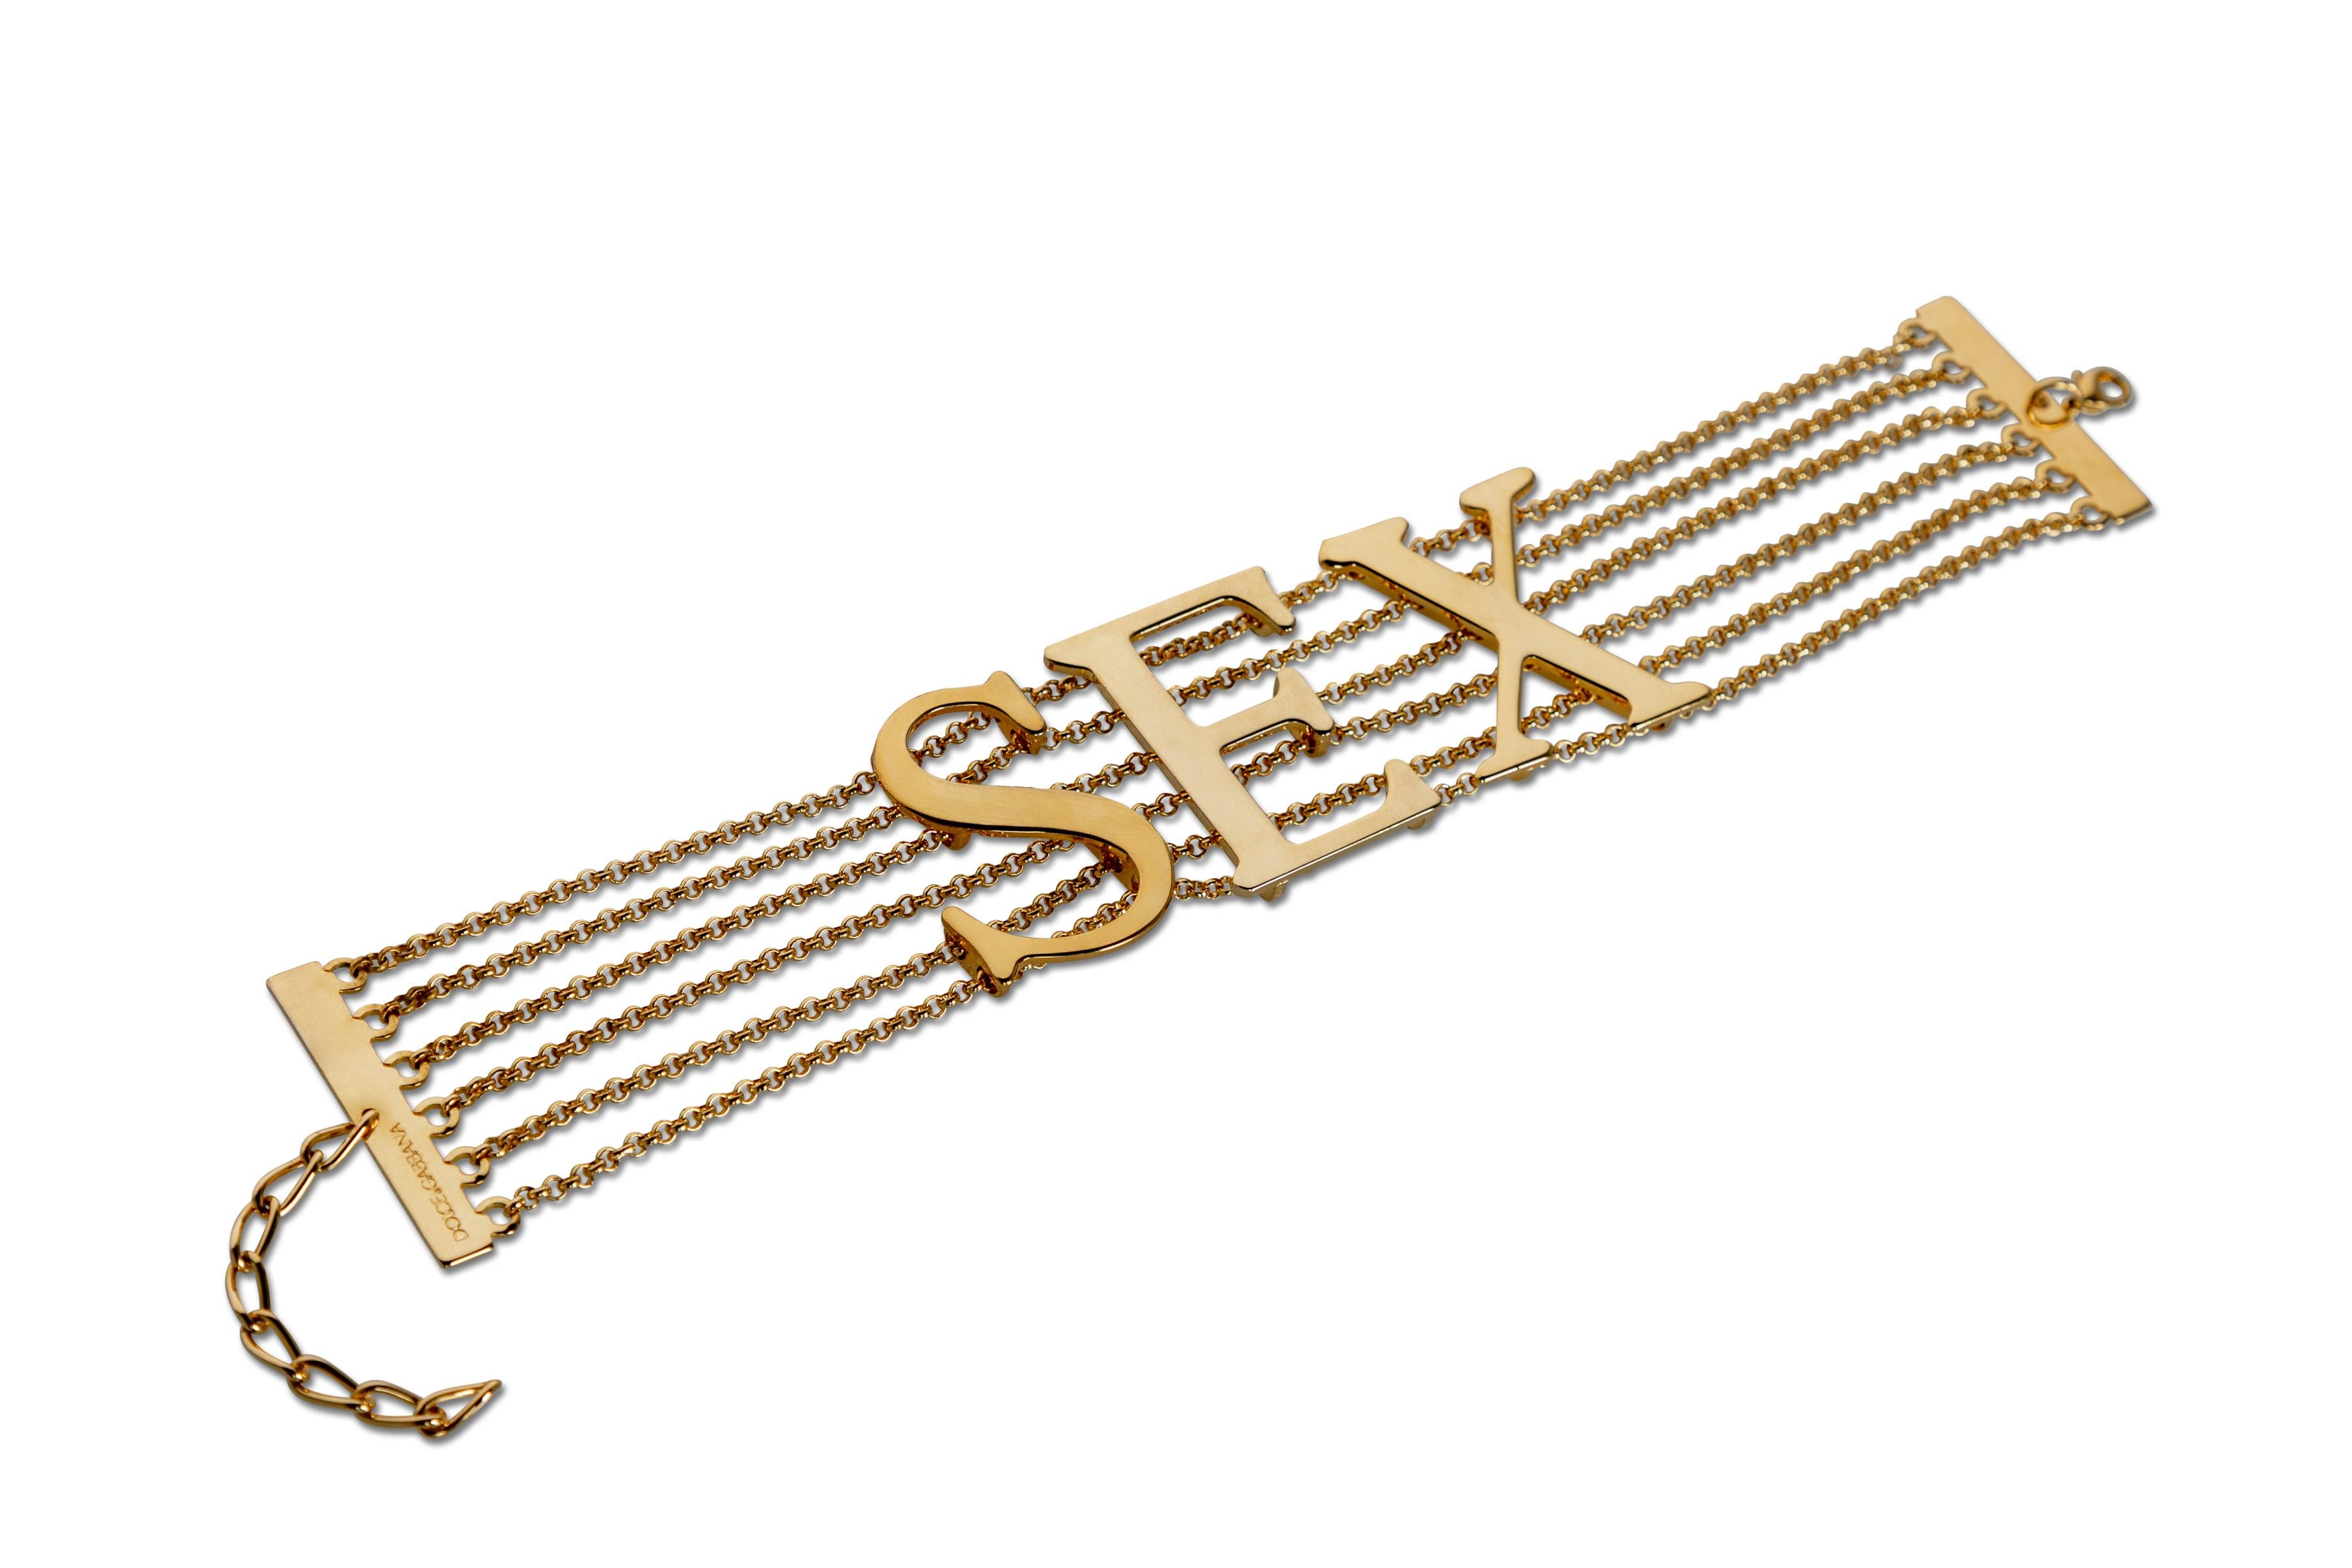 seksi necklace meaning in english